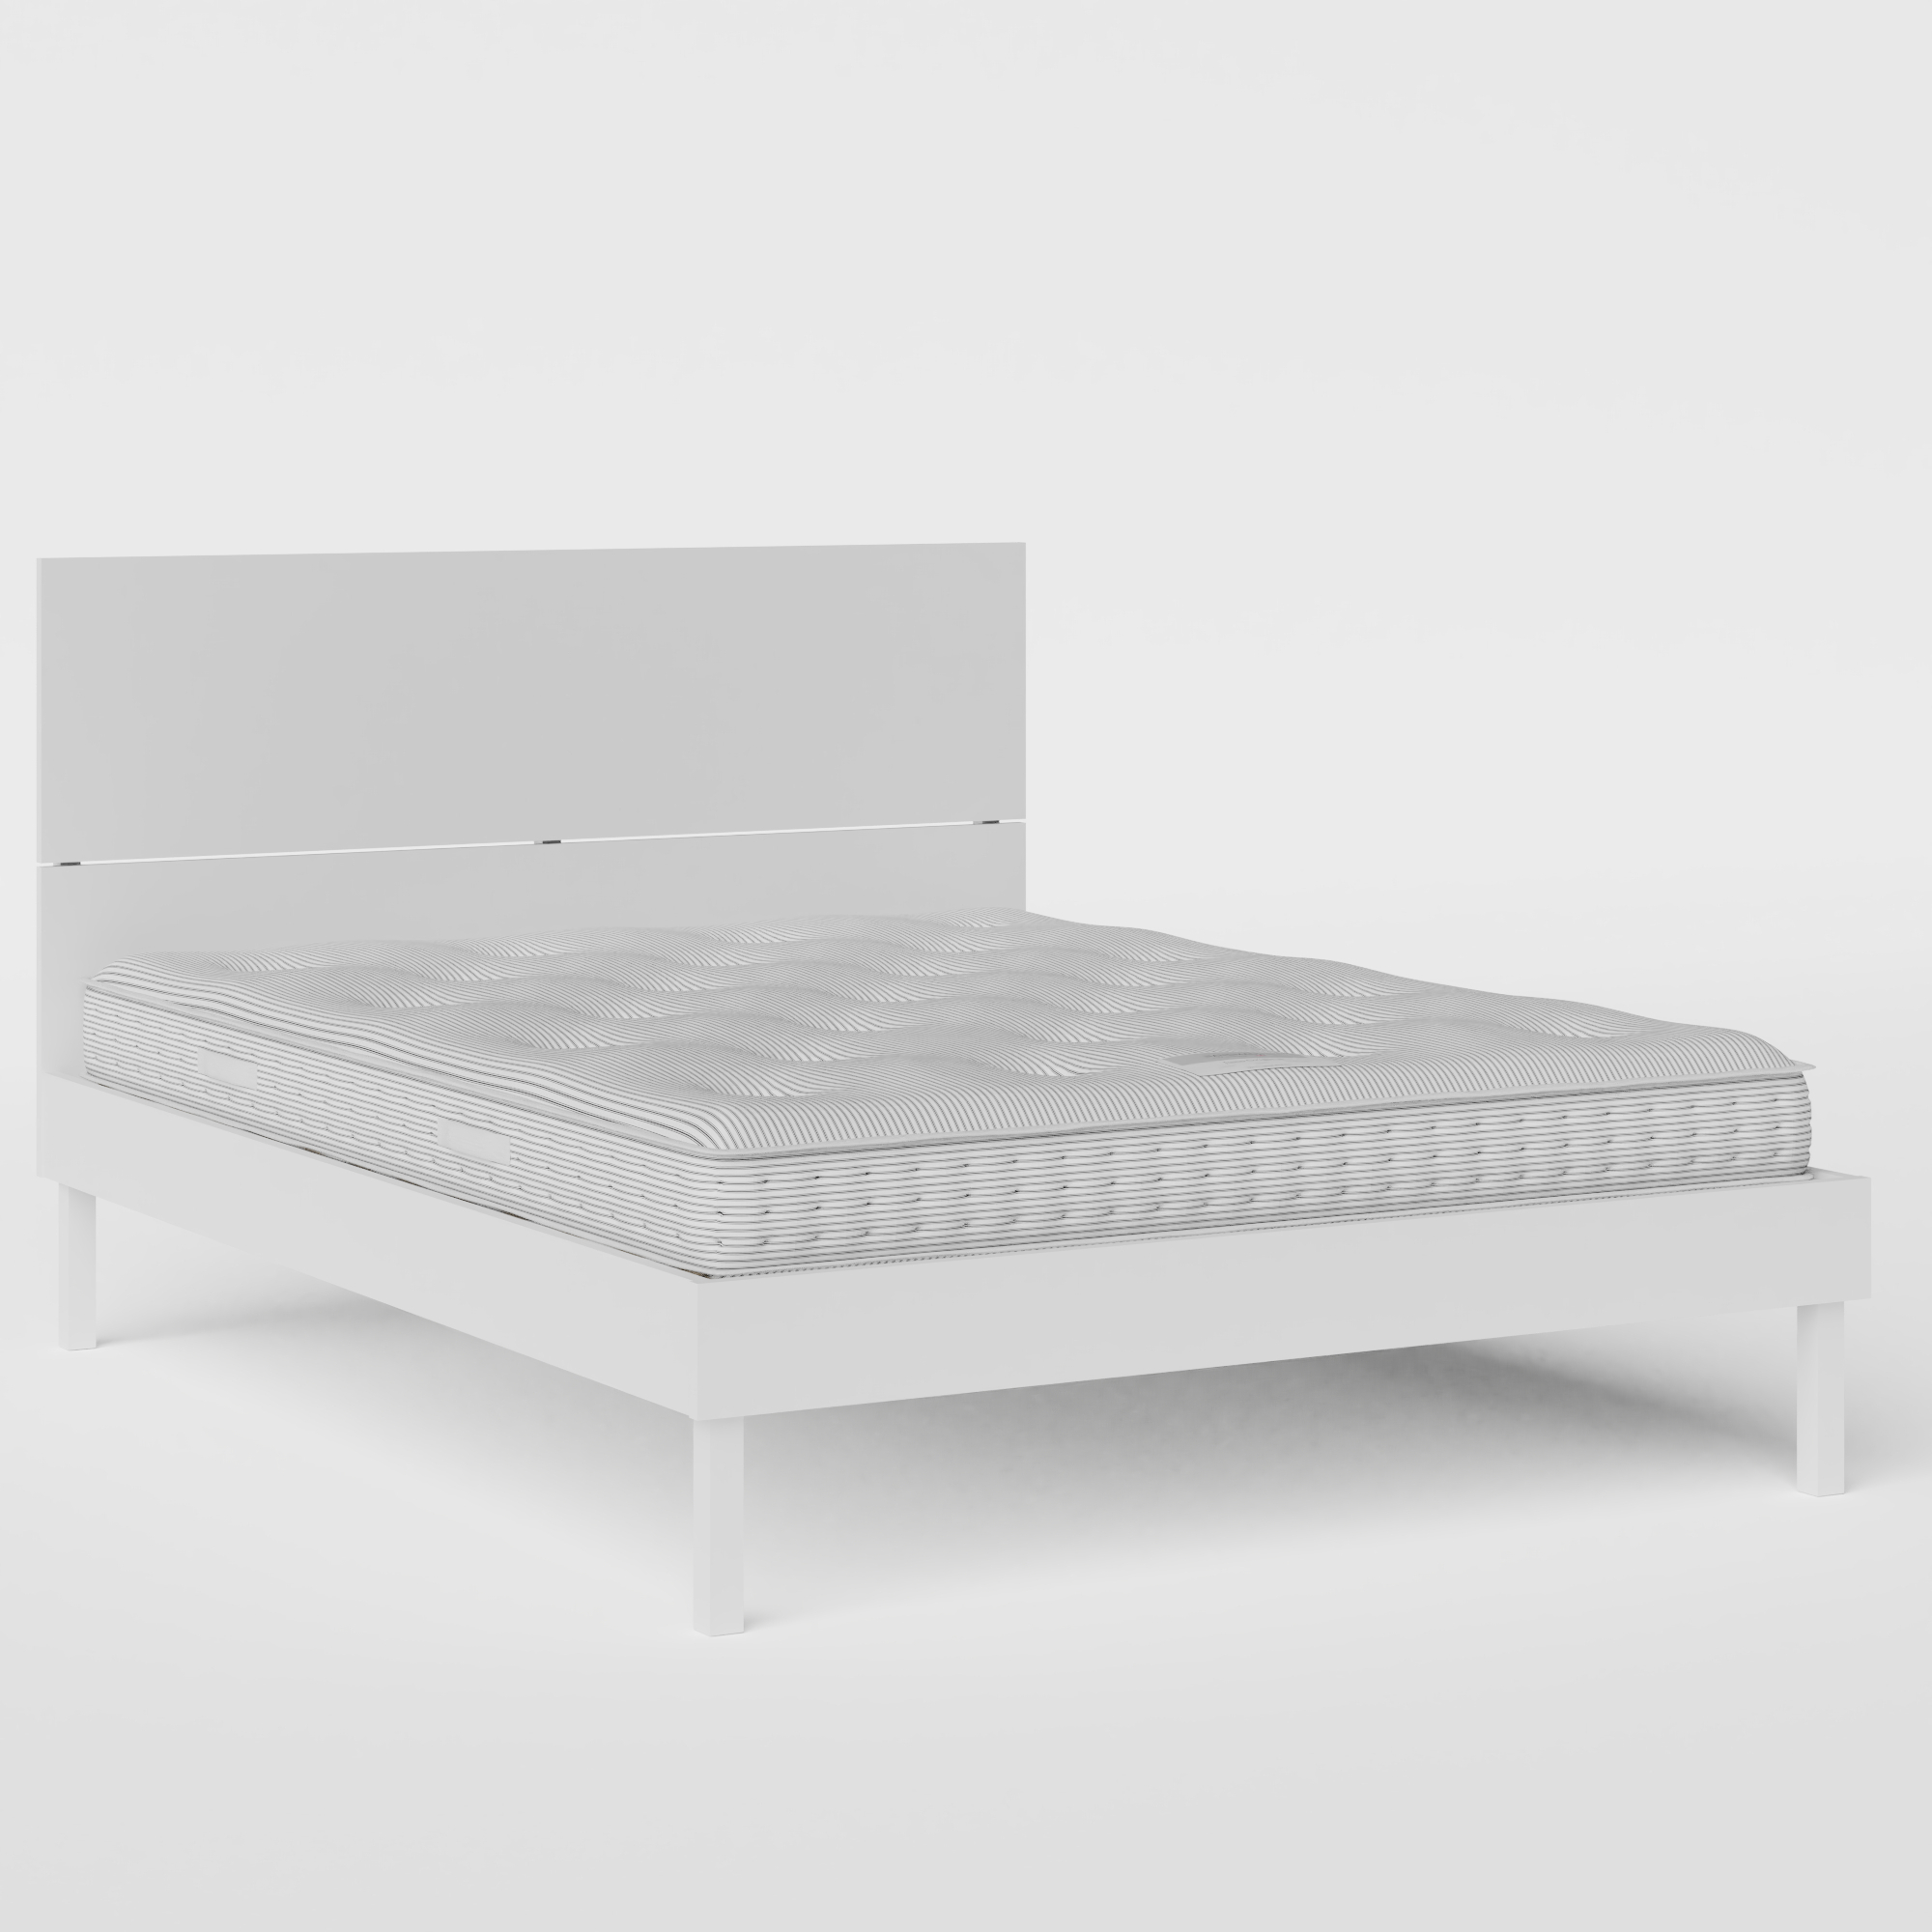 Misaki Painted painted wood bed in white with Juno mattress